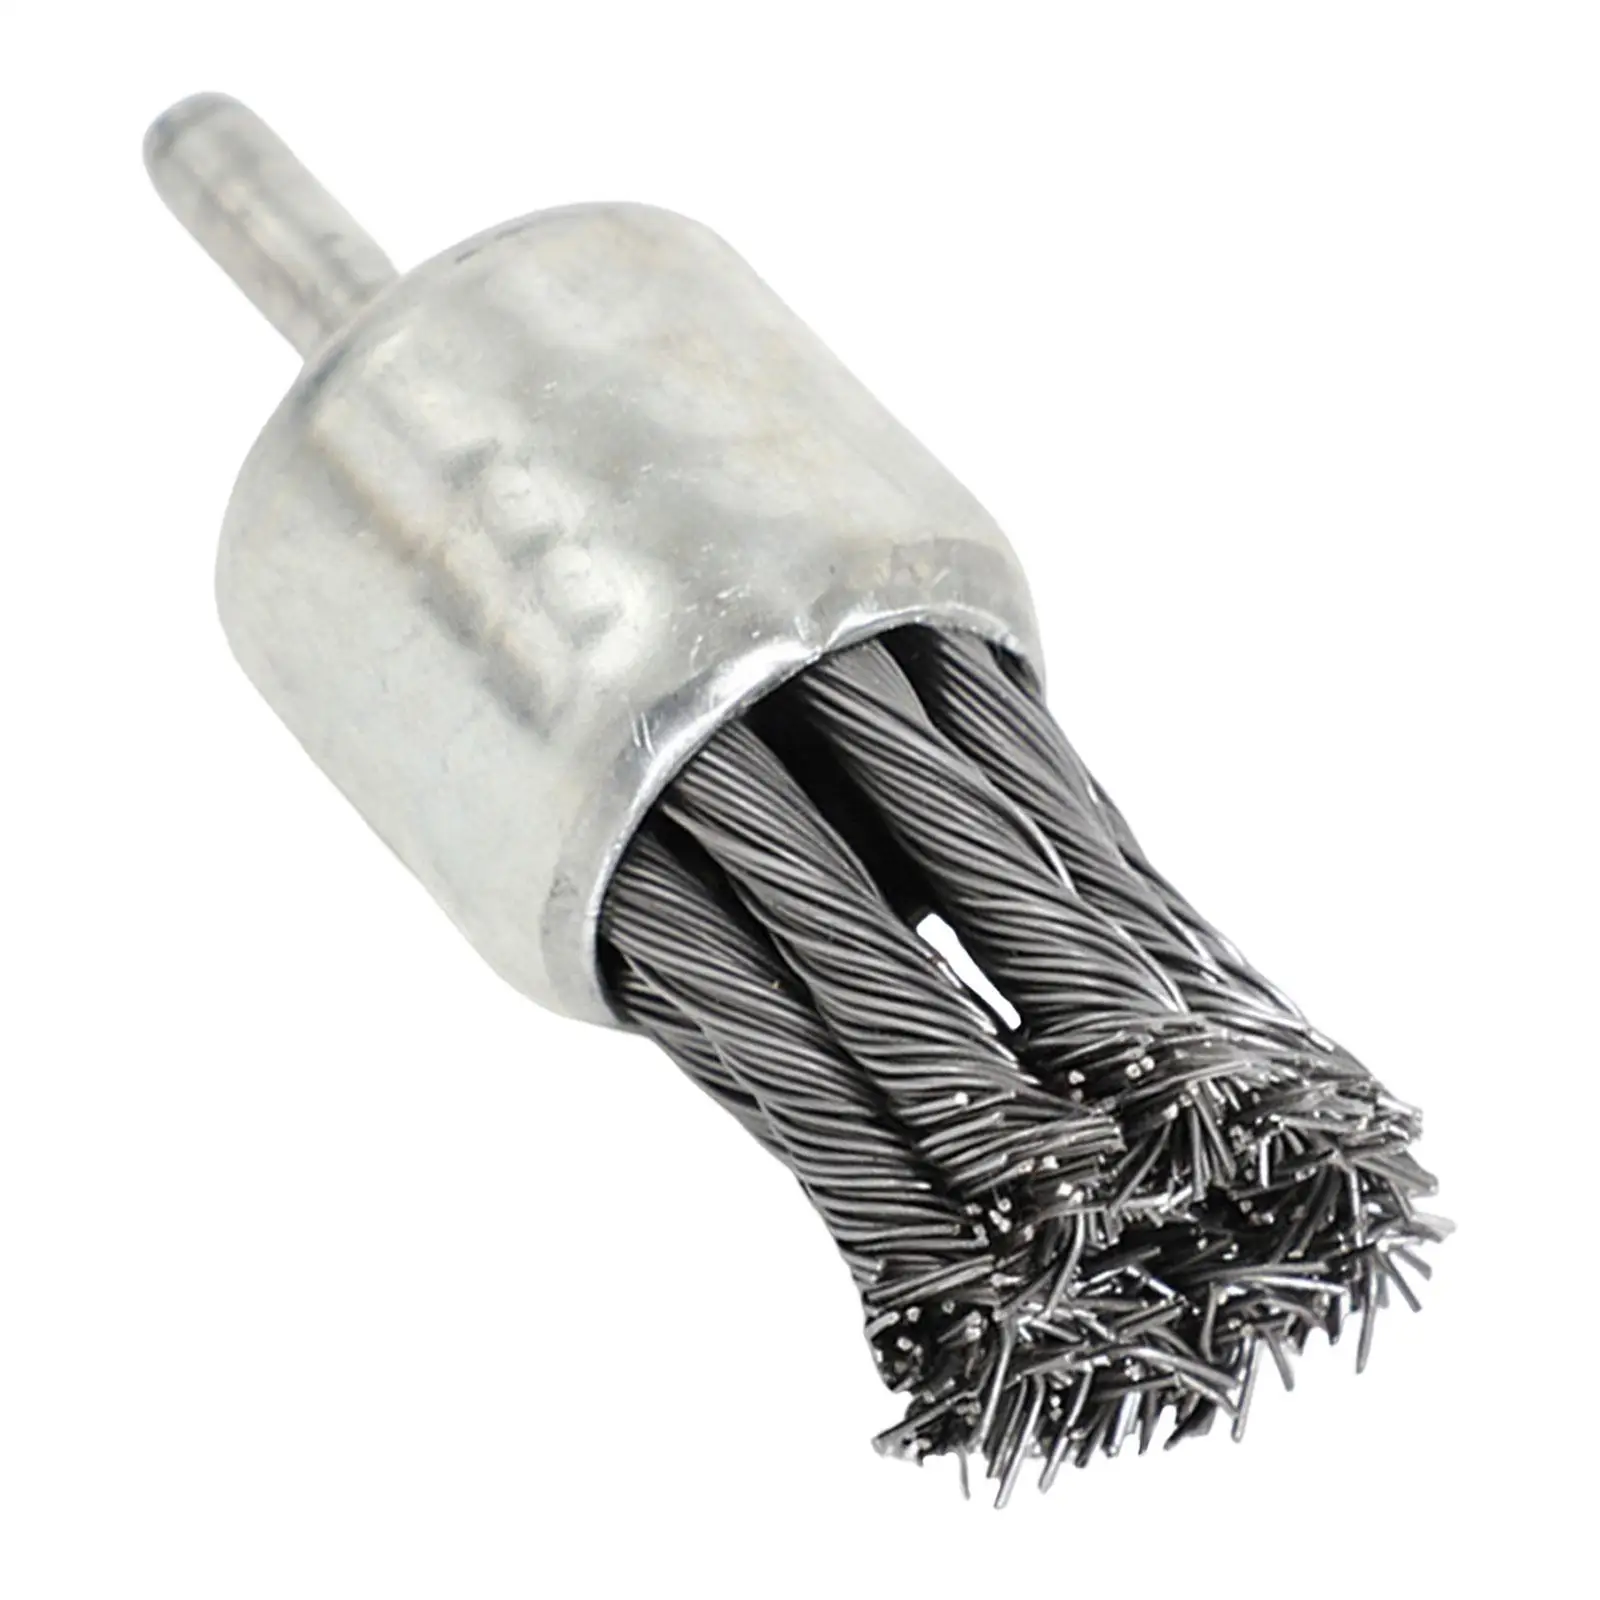 Steel Wire Brush Cleaning Rust, and Steel Replacement Accessory Metal Derusting Brush for Drill